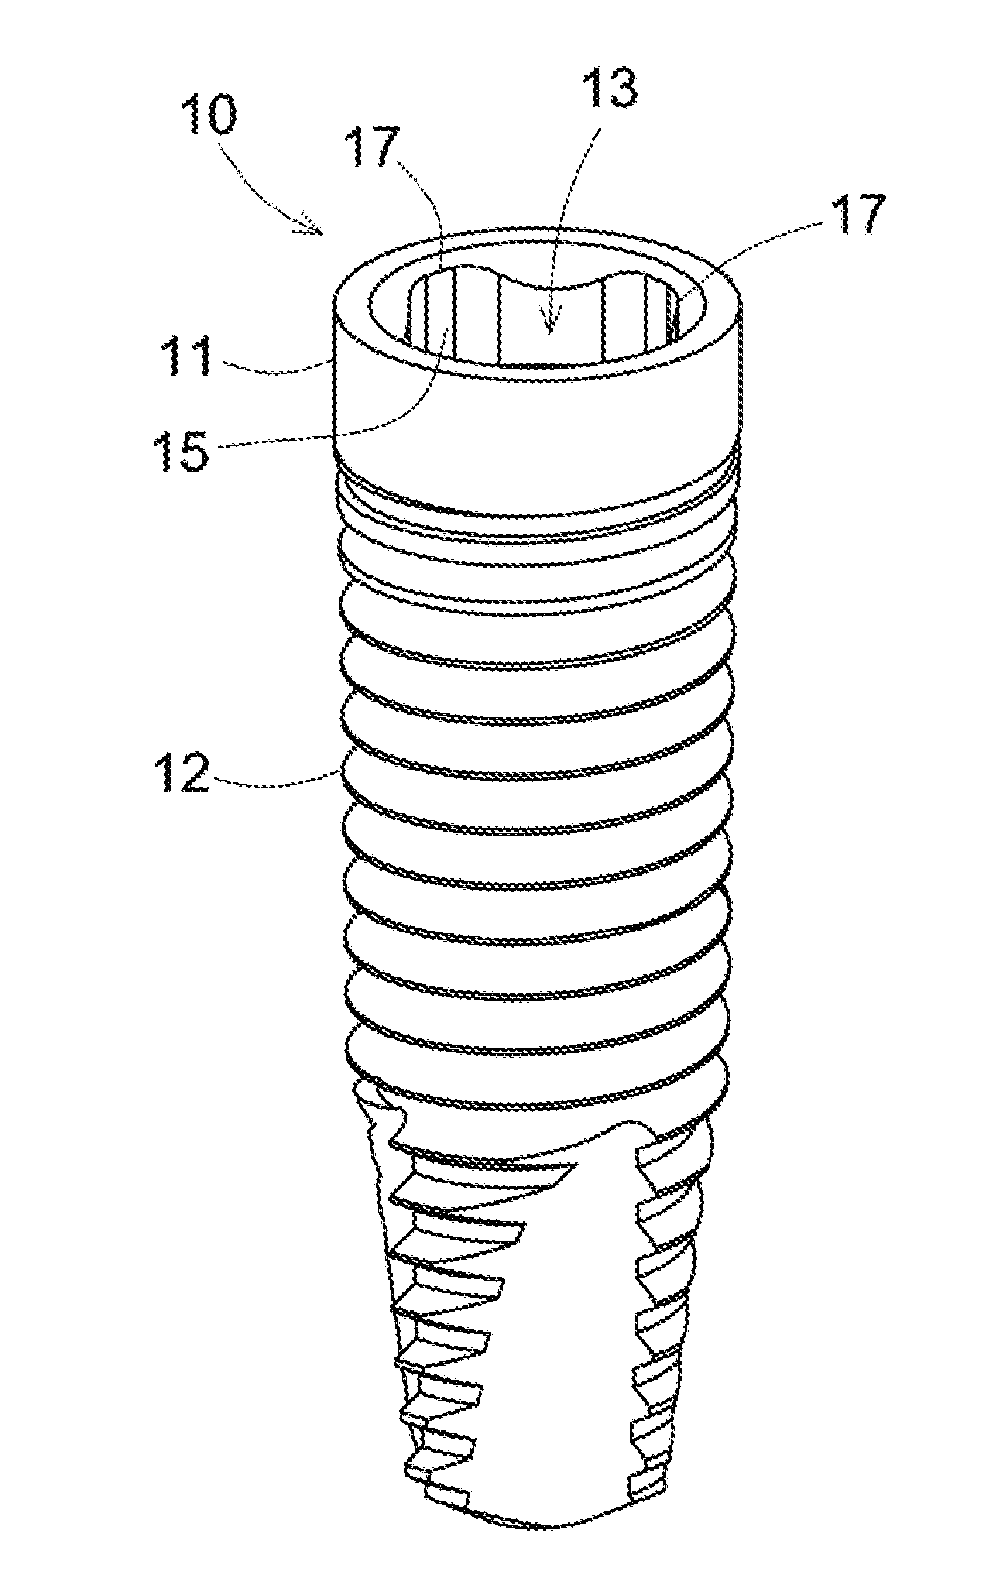 Set of a dental implant and prosthetic components, including a transepithelial sleeve with an Anti-rotational upper connection